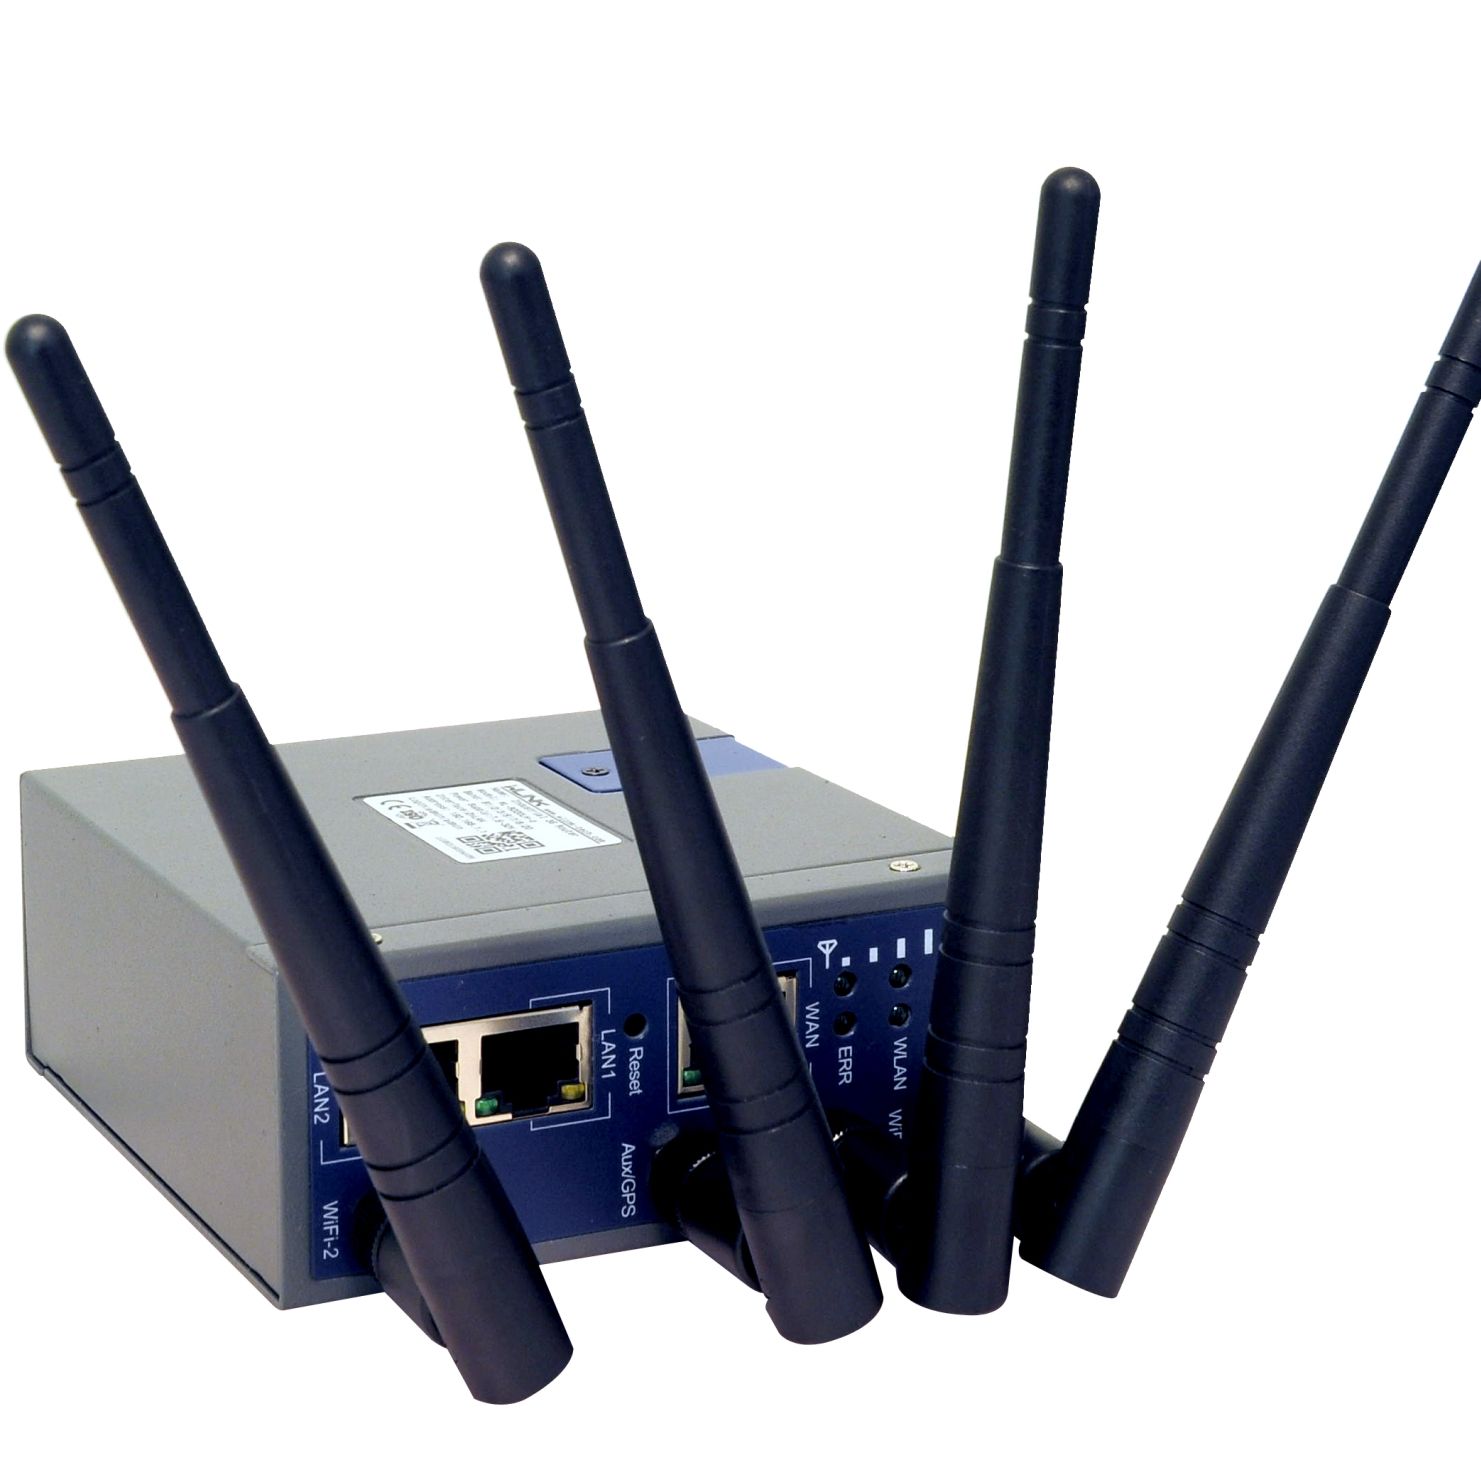 R220 Industrial 4G Router OpenWrt OS